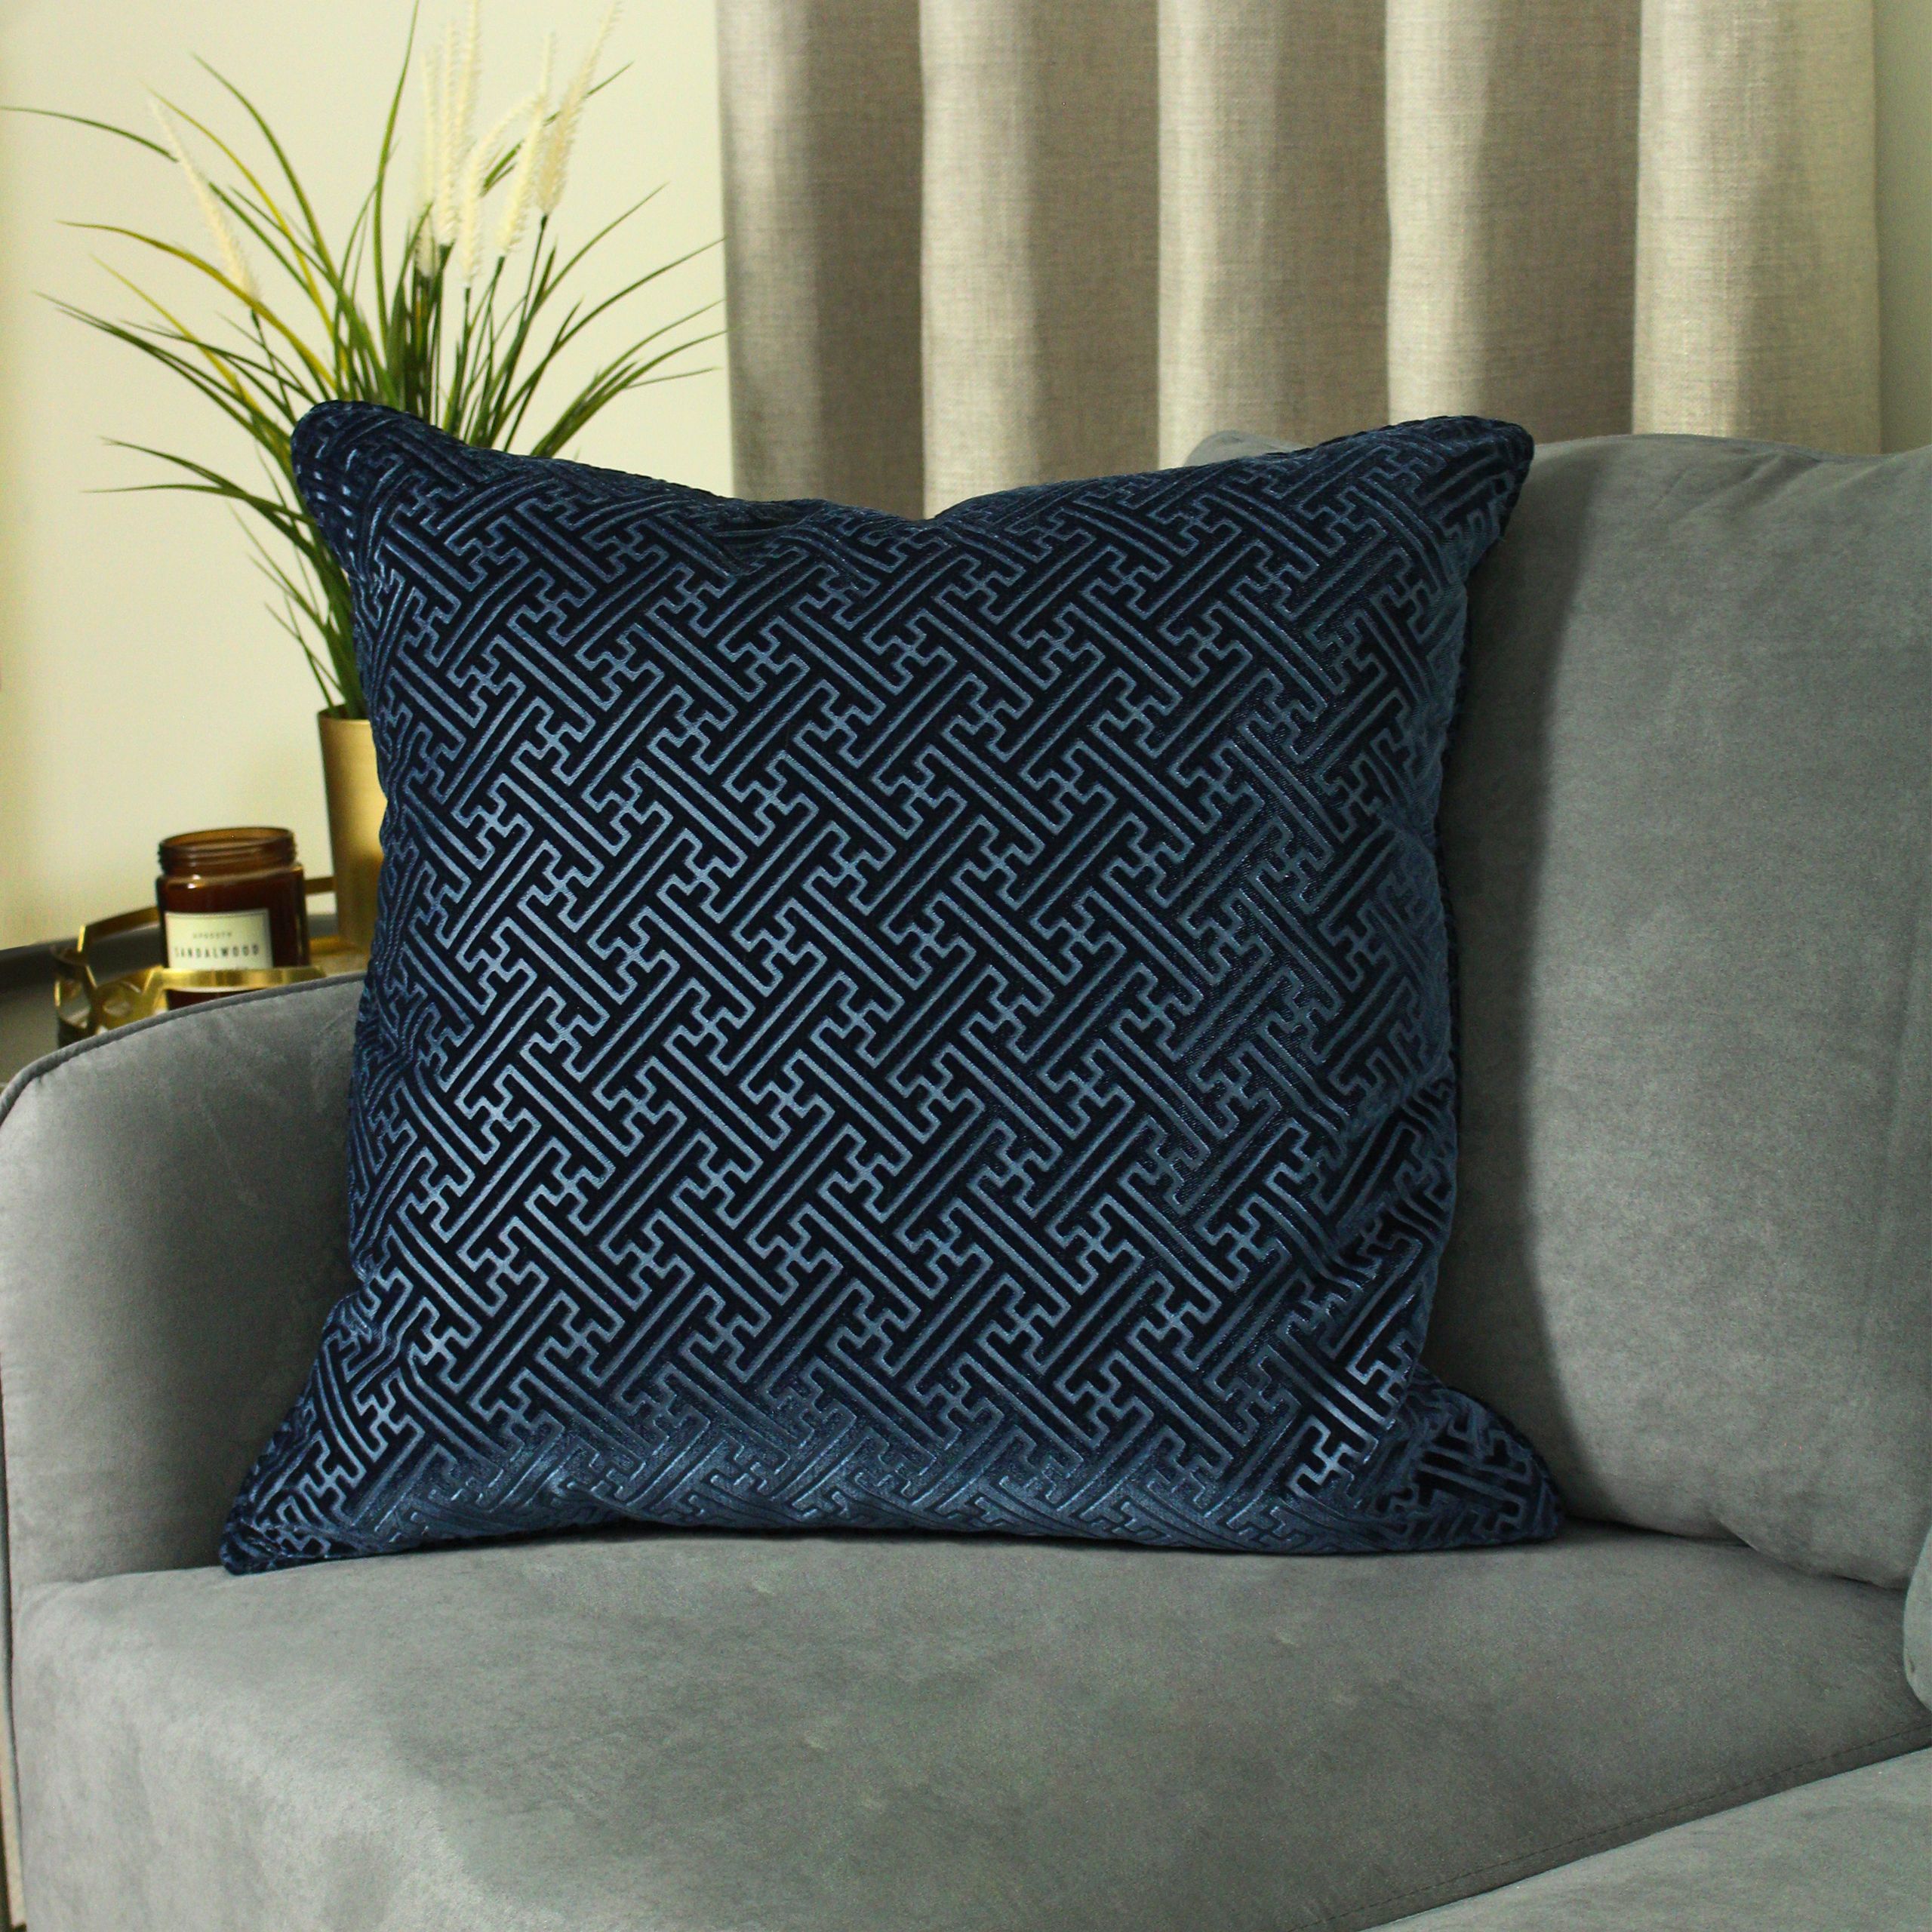 The Florence cushion features an embossed design inspired by timeless Greek key patterns. Complete with matching coloured piped edging and hidden zip closure, this 100% polyester cushion is hard-wearing and don't stain easily. This design will be super soft yet durable with excellent easy care properties.